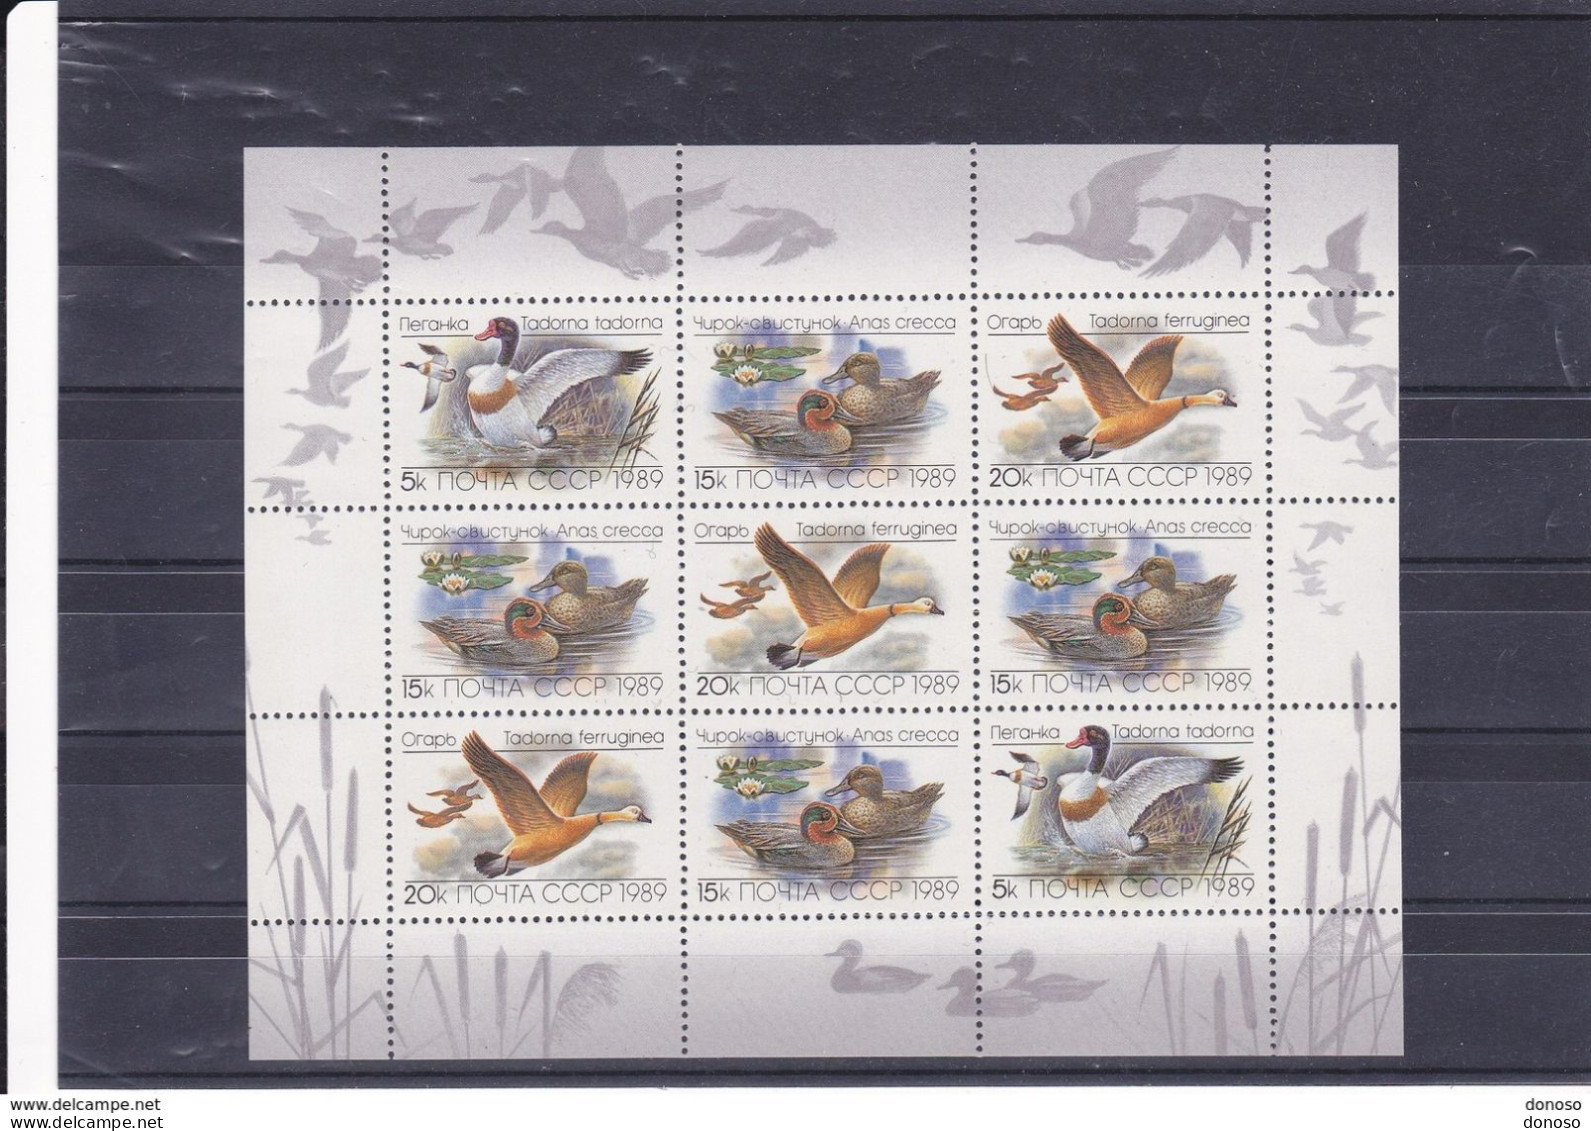 URSS 1989 CANARDS FEUILLET Yvert 5641-5643, Michel 5965-5967  NEUF** MNH Cote Yv 12 Euros - Unused Stamps